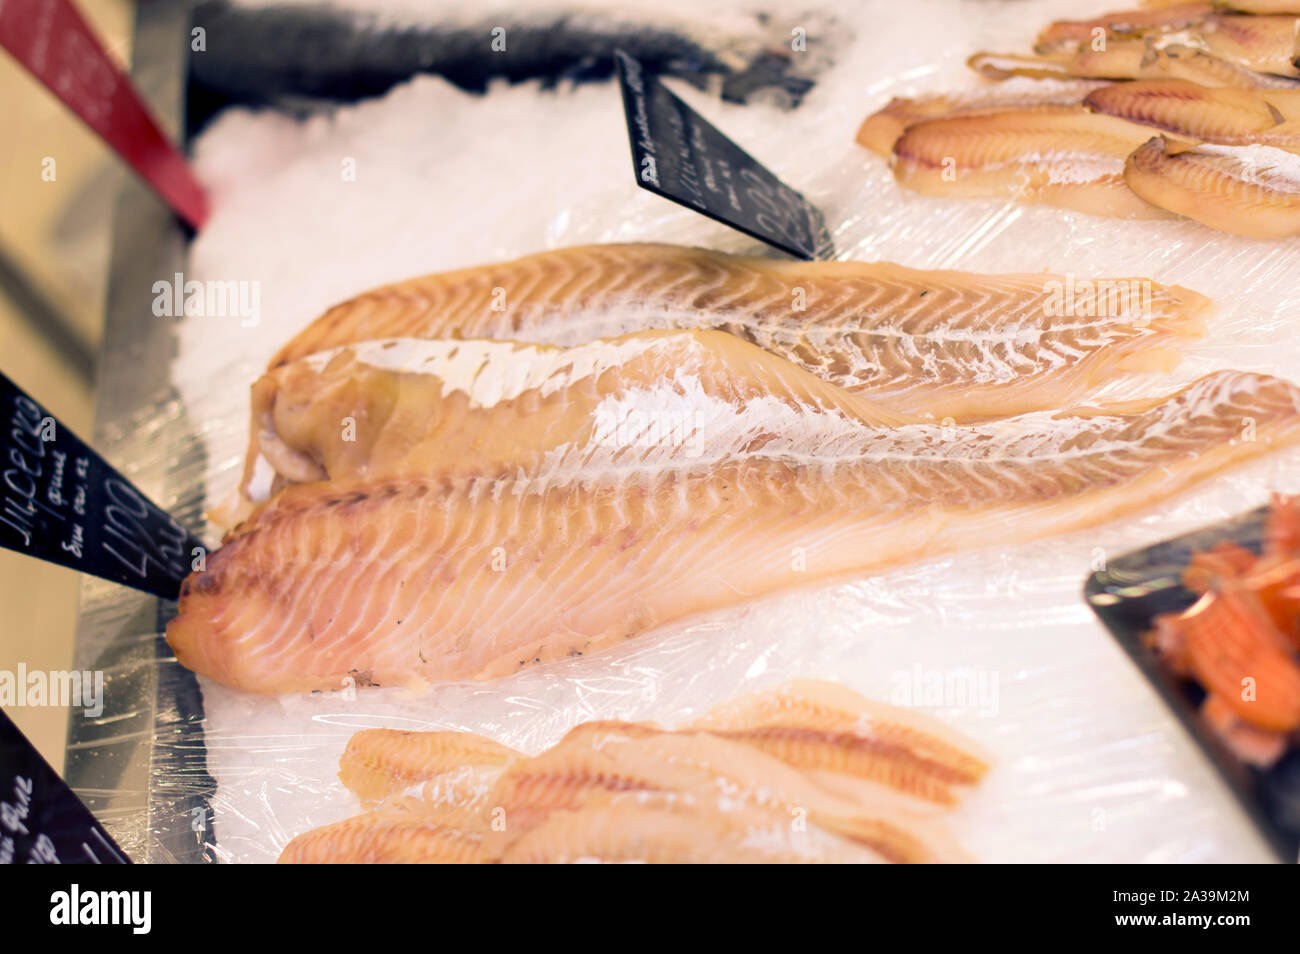 Appetizing slices and pieces of cod fish lie on the ice of the counter, ready for sale in a supermarket. Close-up. Stock Photo